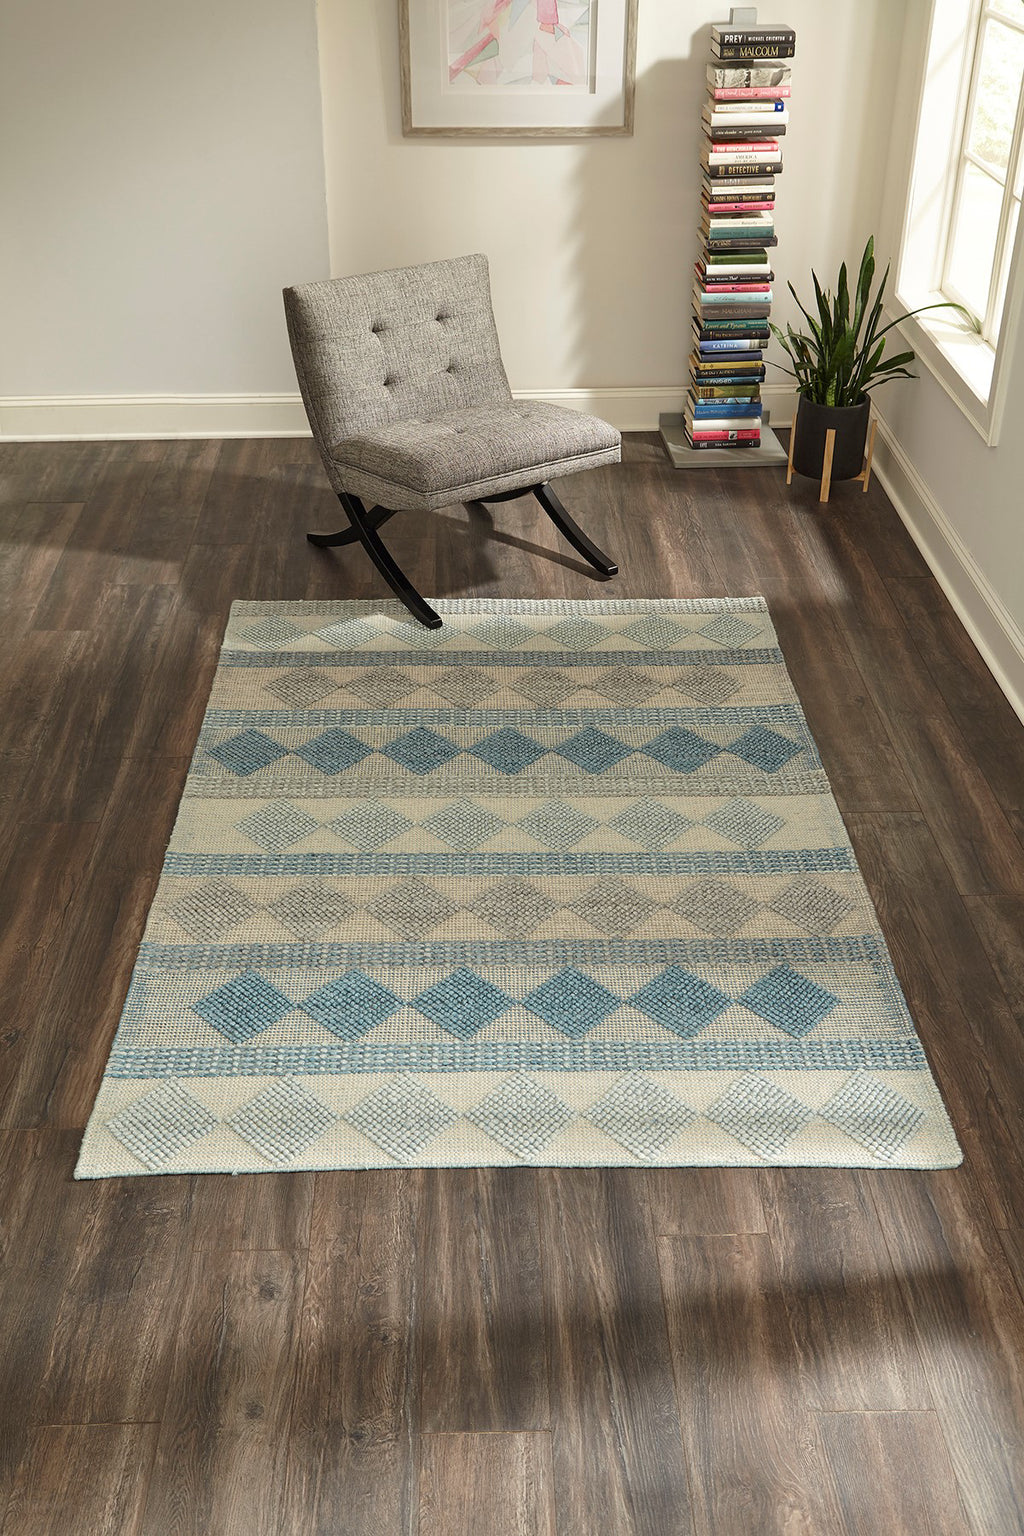 Momeni Andes AND-5 Blue Area Rug Room Image Feature